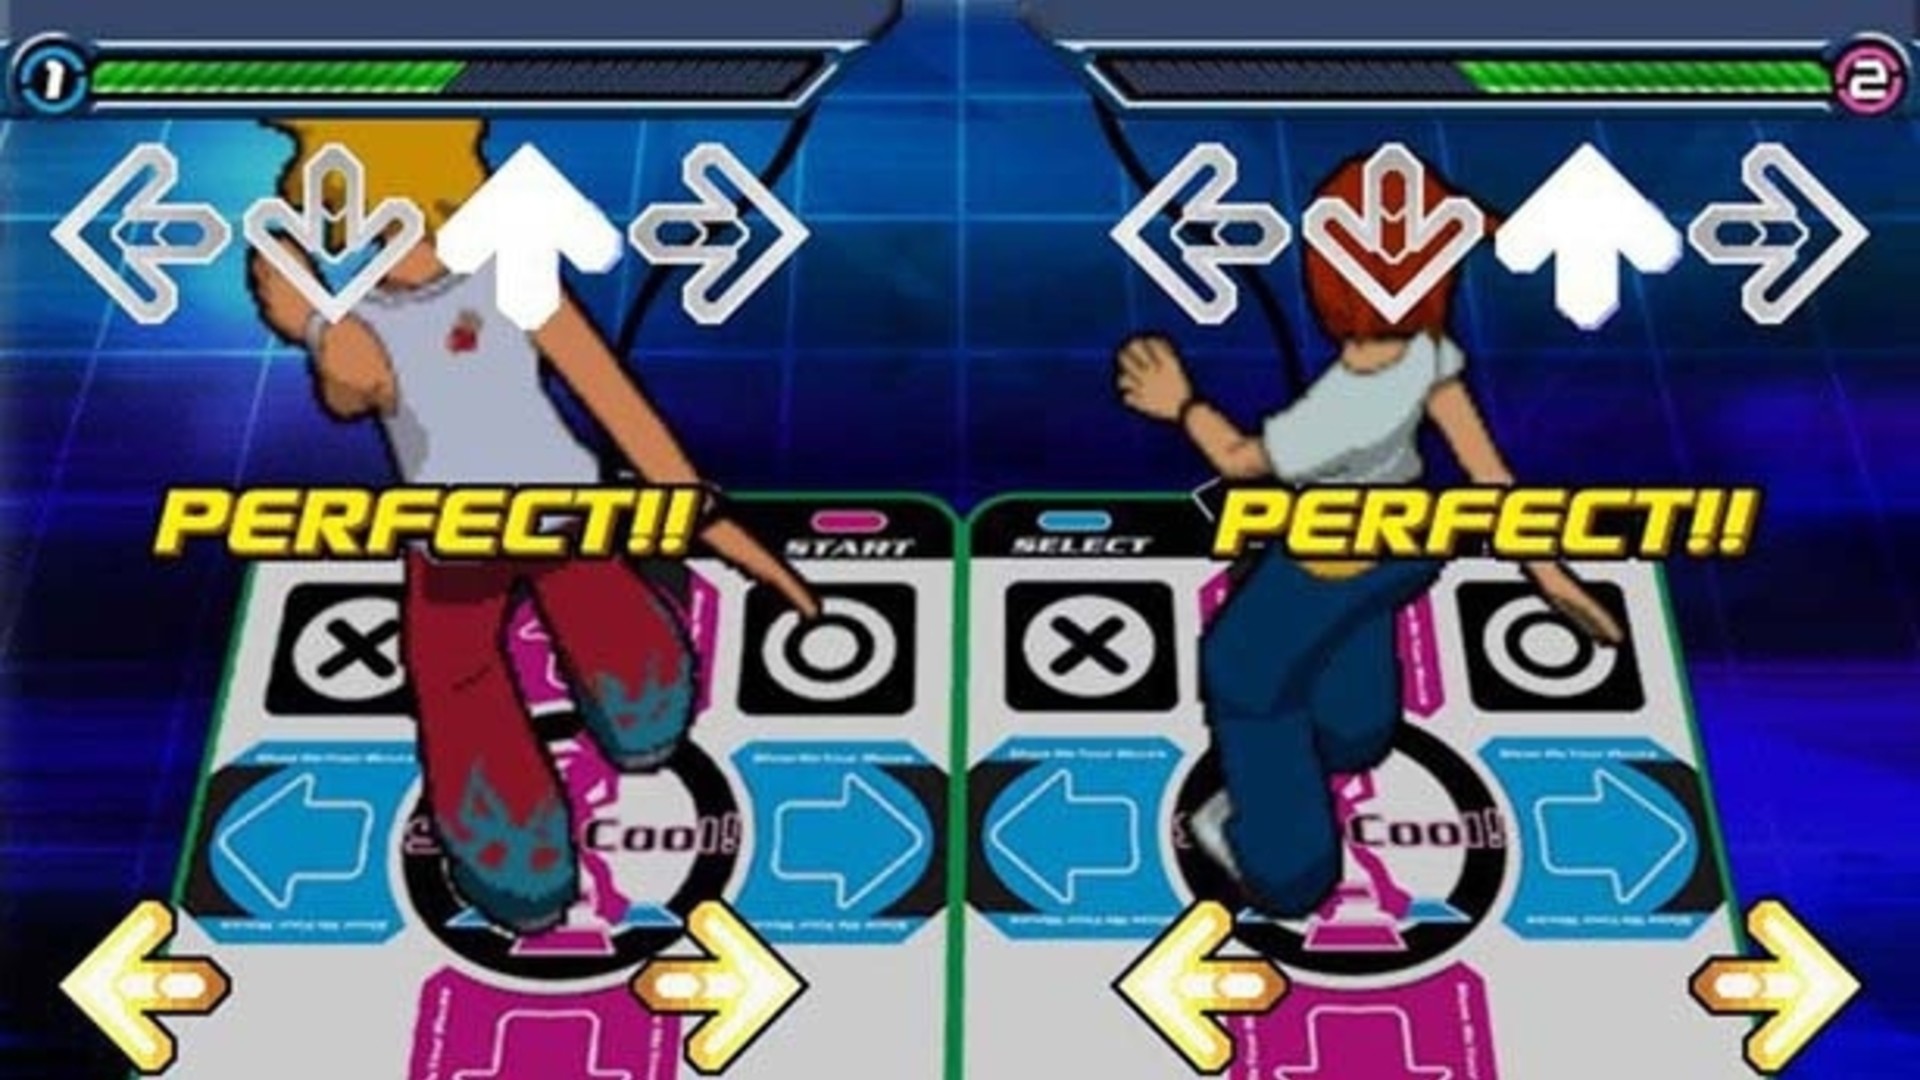 1920x1080 It's been a big couple of weeks for Dance Dance Revolution. Not only did  the game recently celebrate its 20th birthday, but it seems the game is due  to be ...